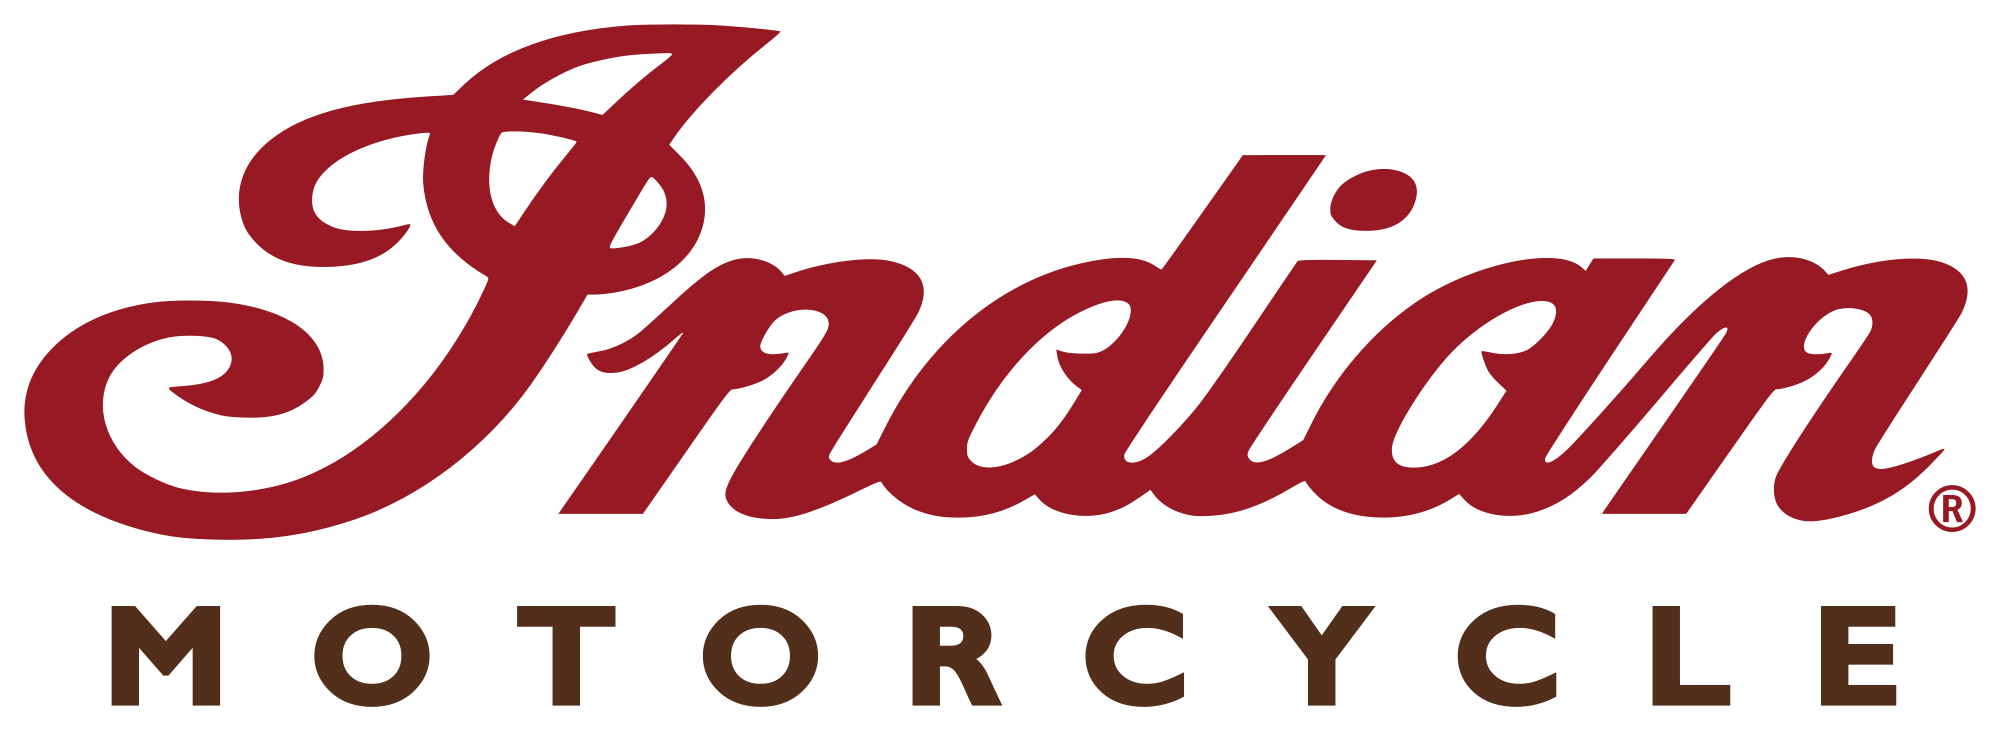 All Motorcycle Logo - File:Indian Motorcycle logo.svg - Wikimedia Commons